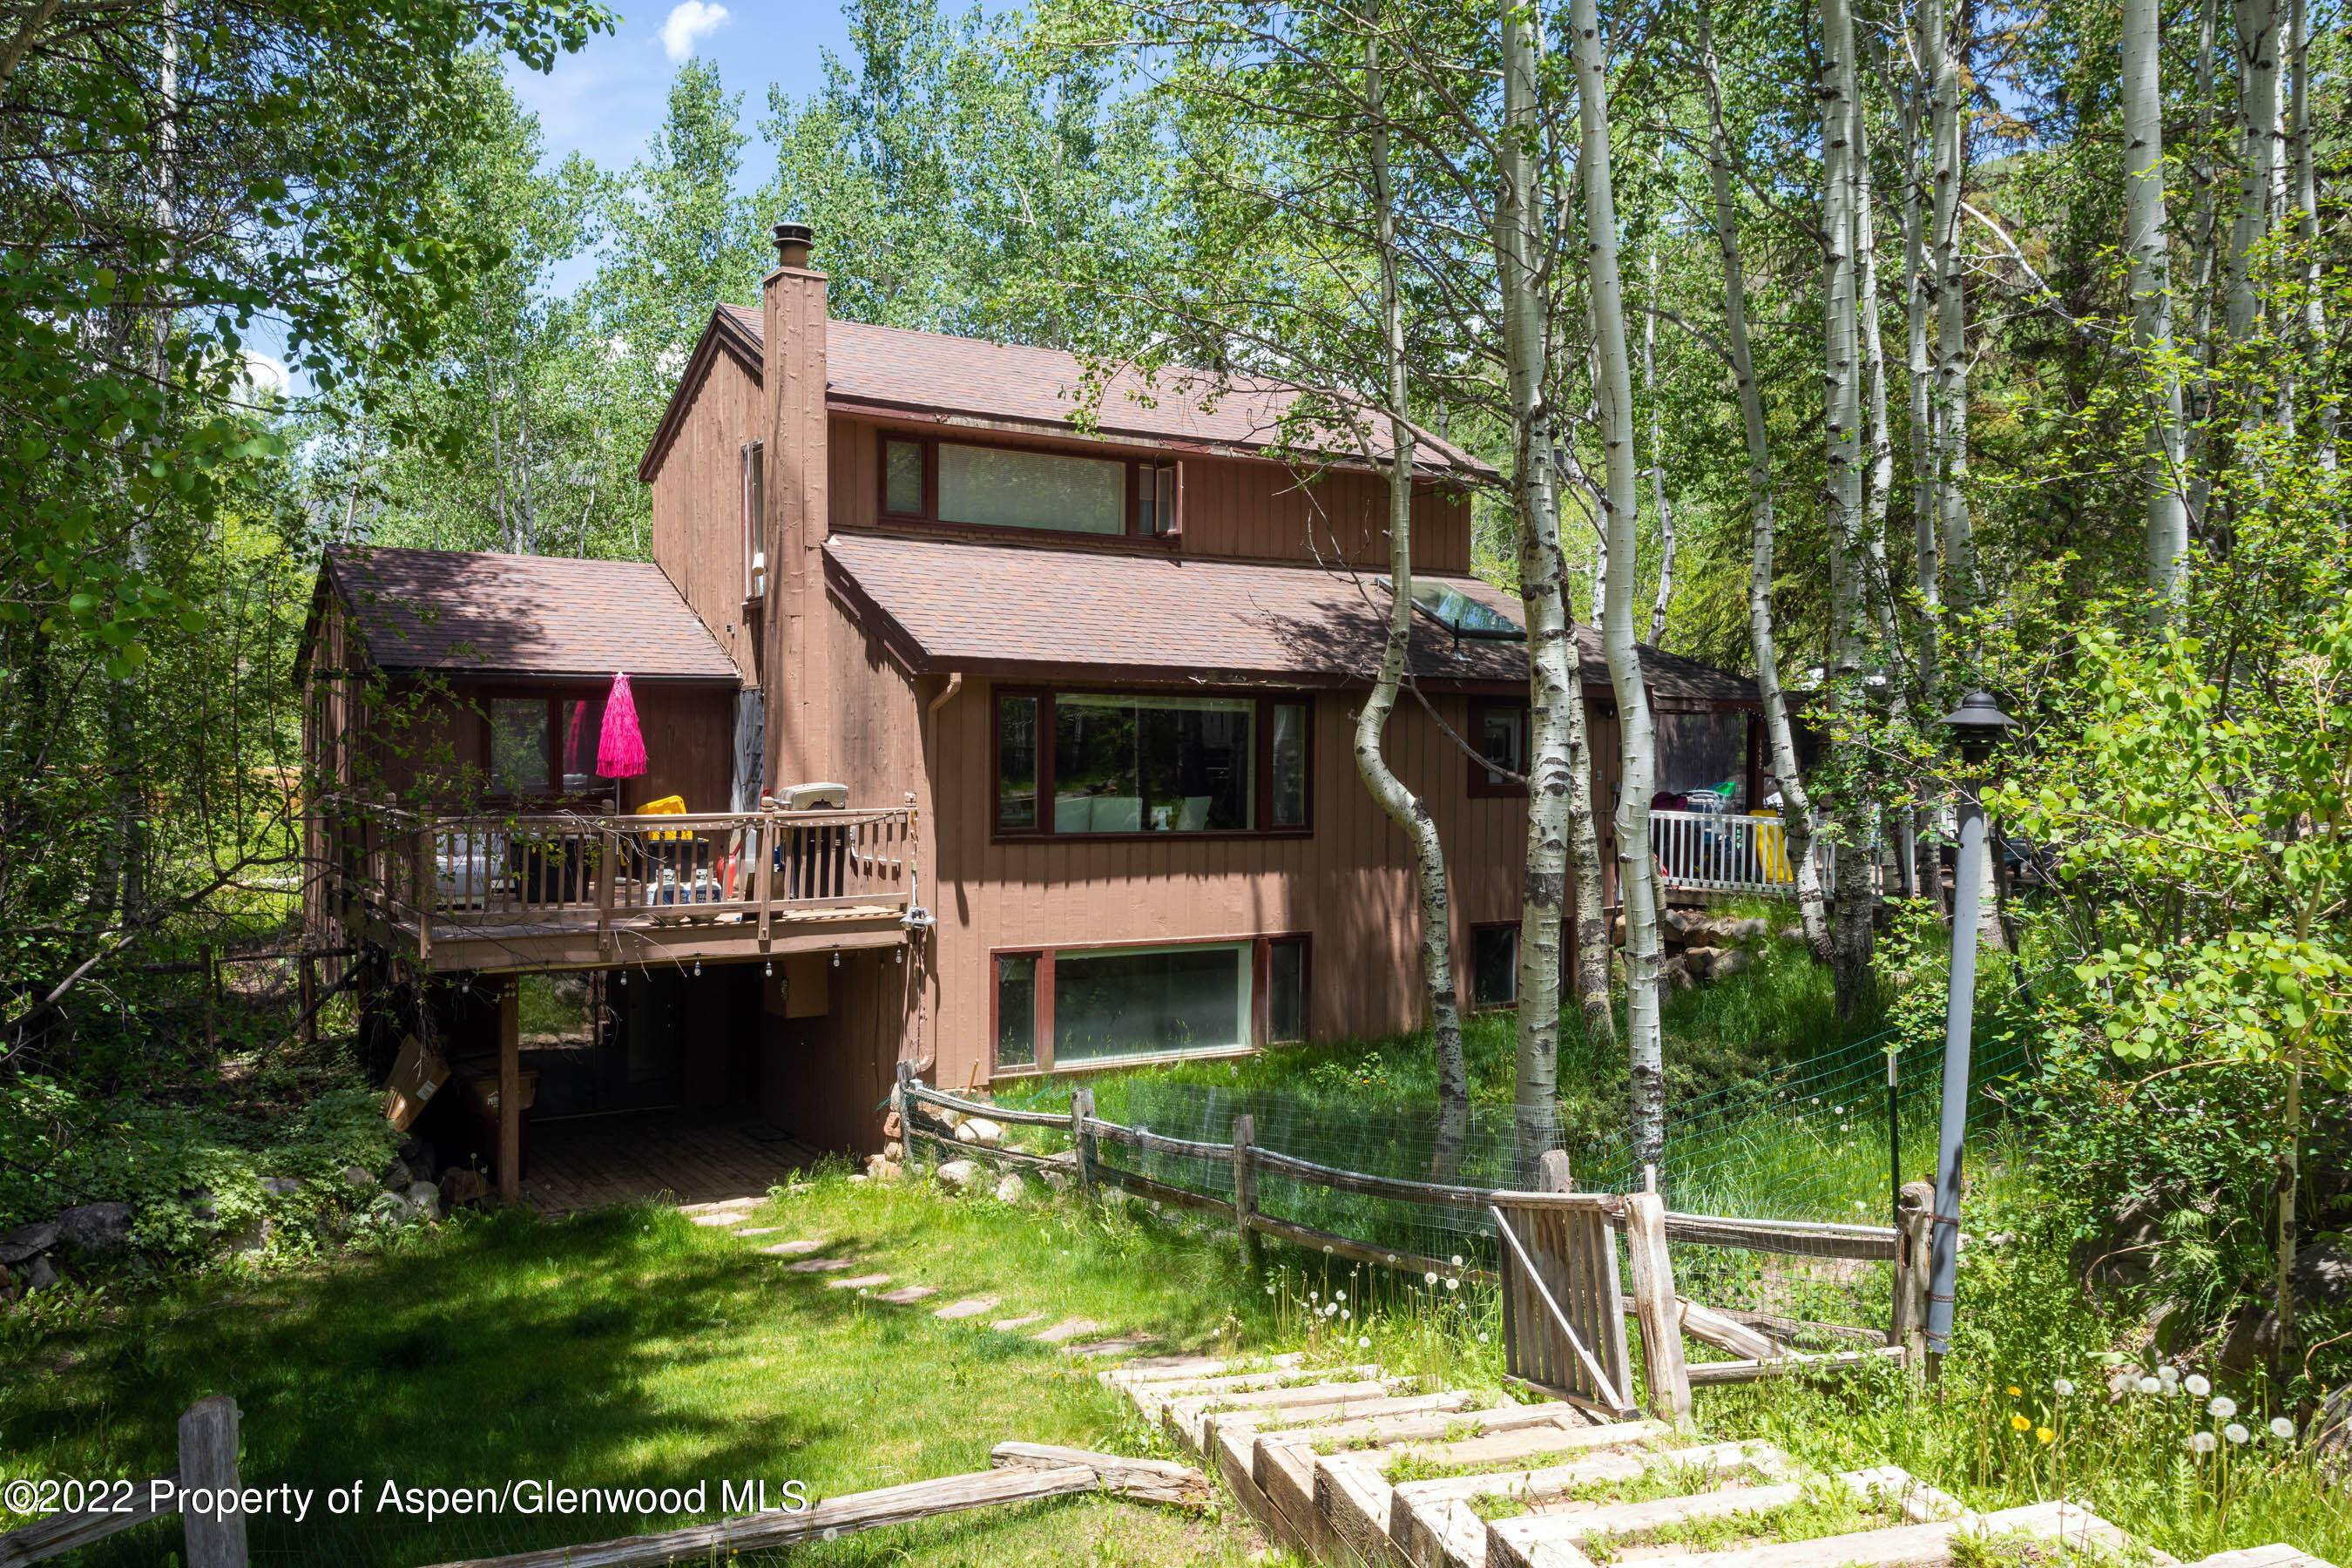 This five bedroom, five full bathroom home is tucked in with mature Aspen trees as if it were always meant to be there.